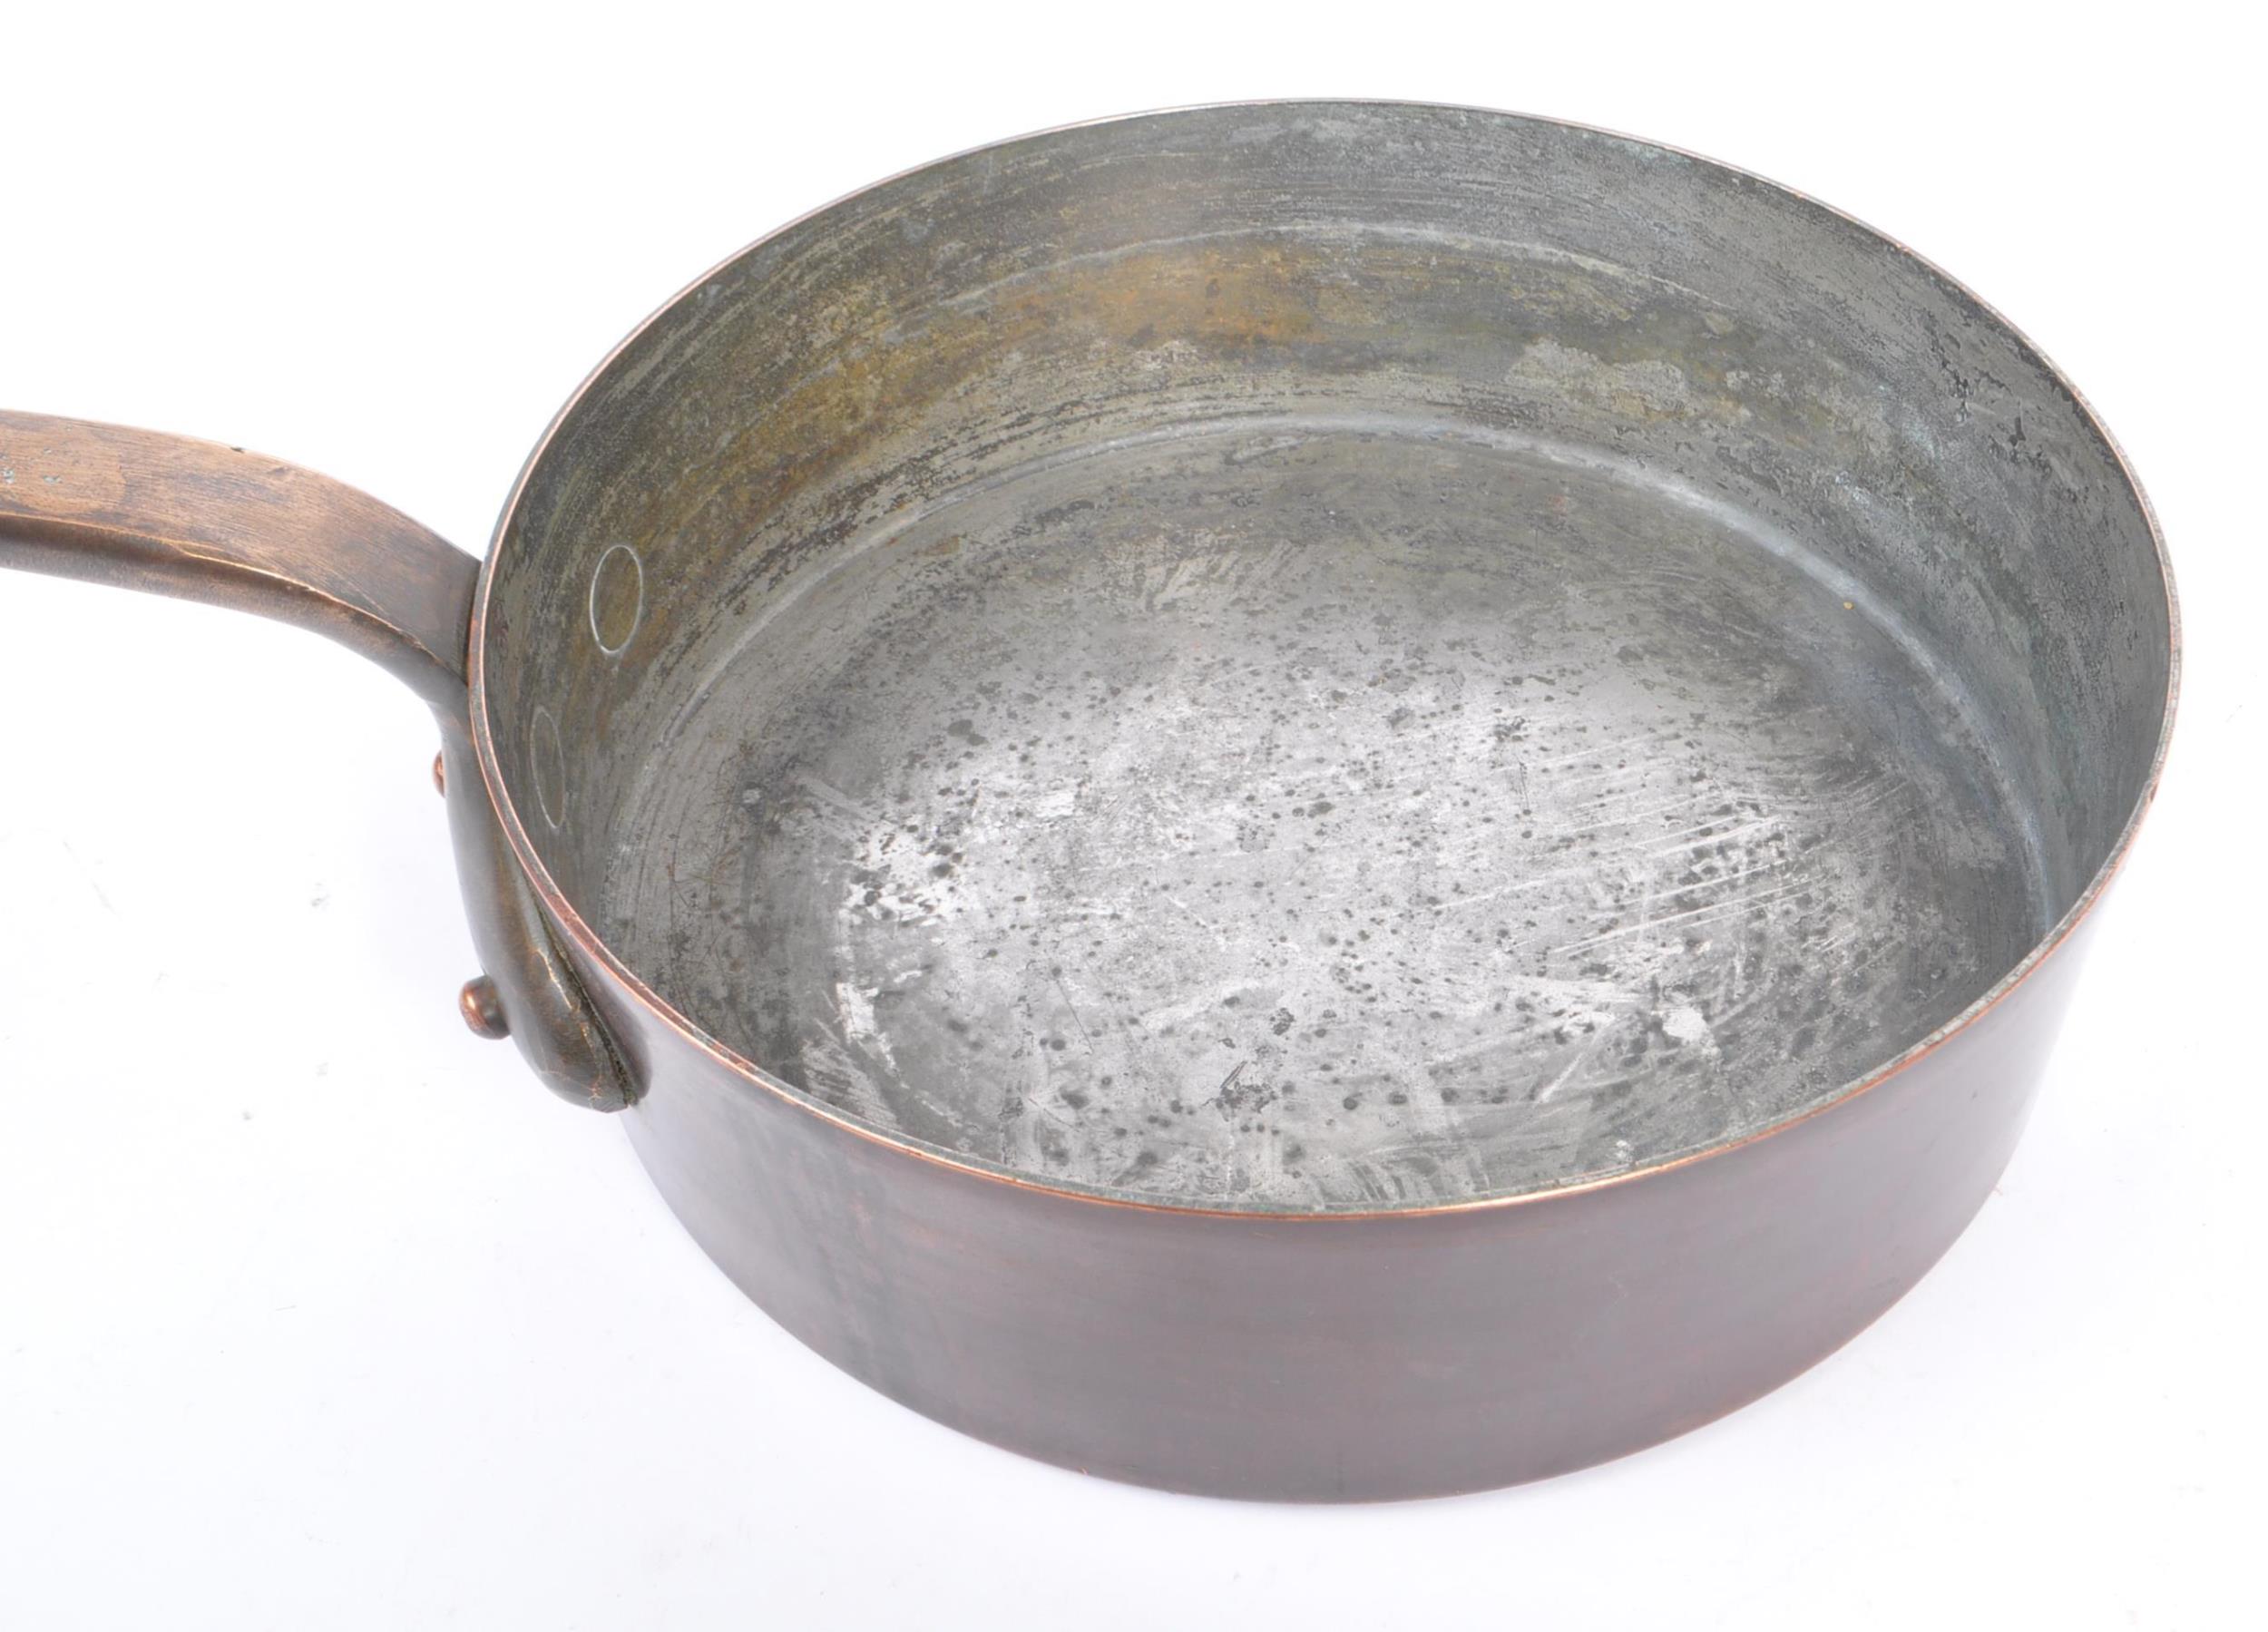 LARGE HEAVYWEIGHT MID 20TH CENTURY COPPER & BRONZE SKILLET PAN - Image 5 of 5